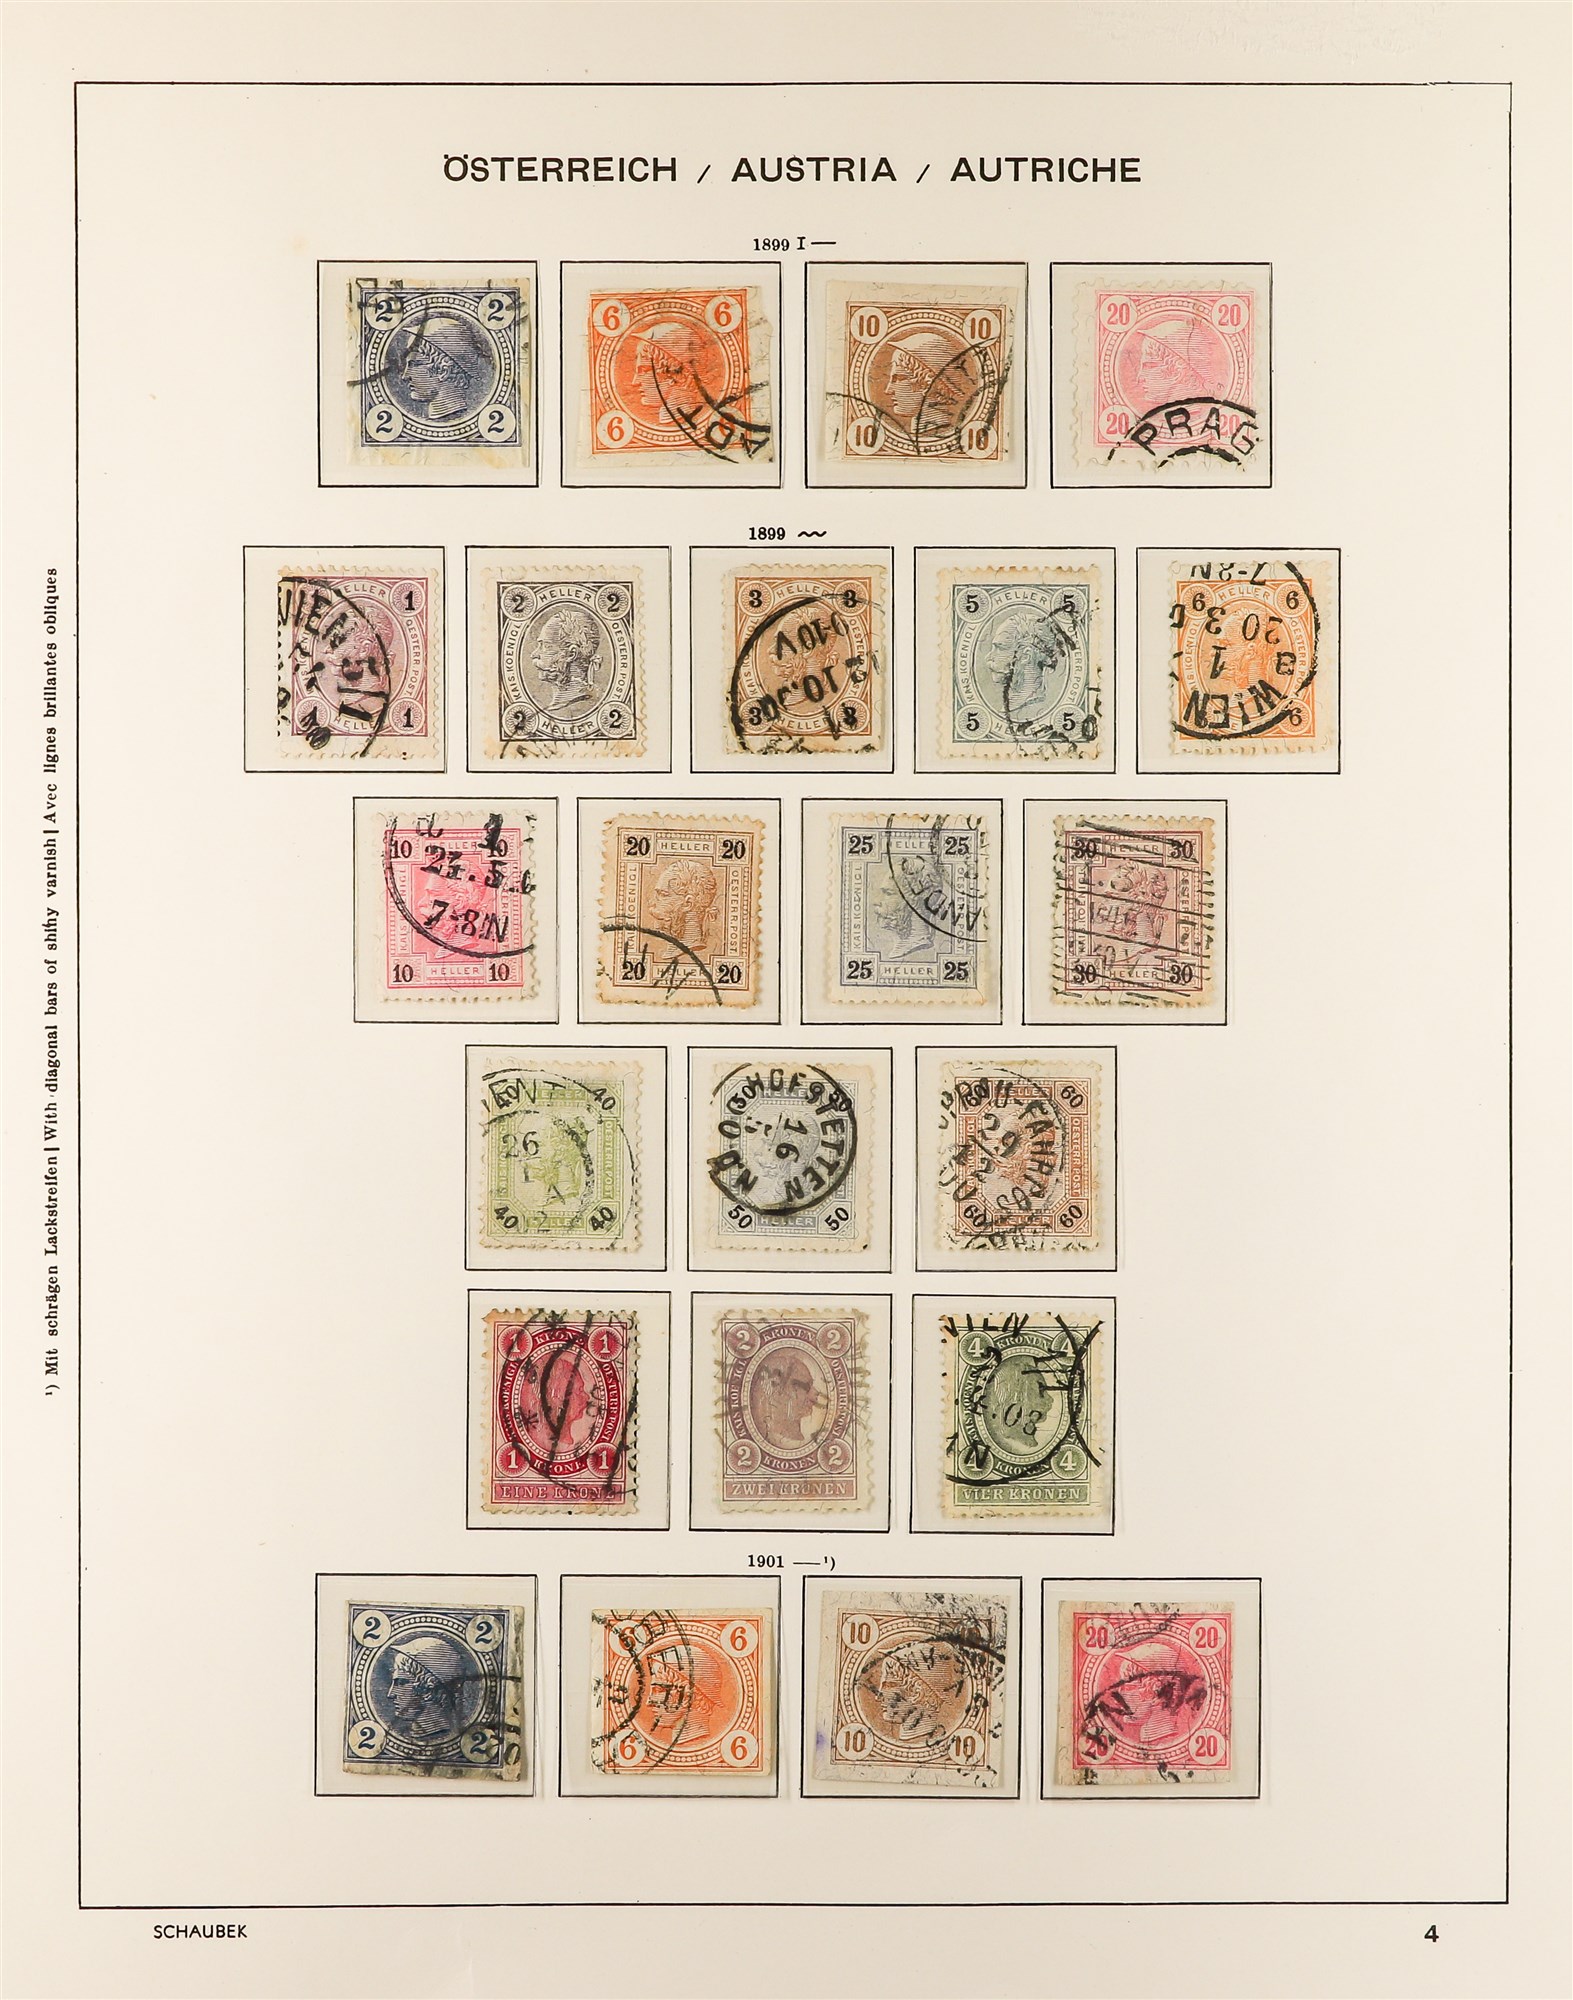 AUSTRIA 1850 - 1937 COLLECTION. of around 1000 mint & used stamps in Schaubek Austria hingeless - Image 8 of 29